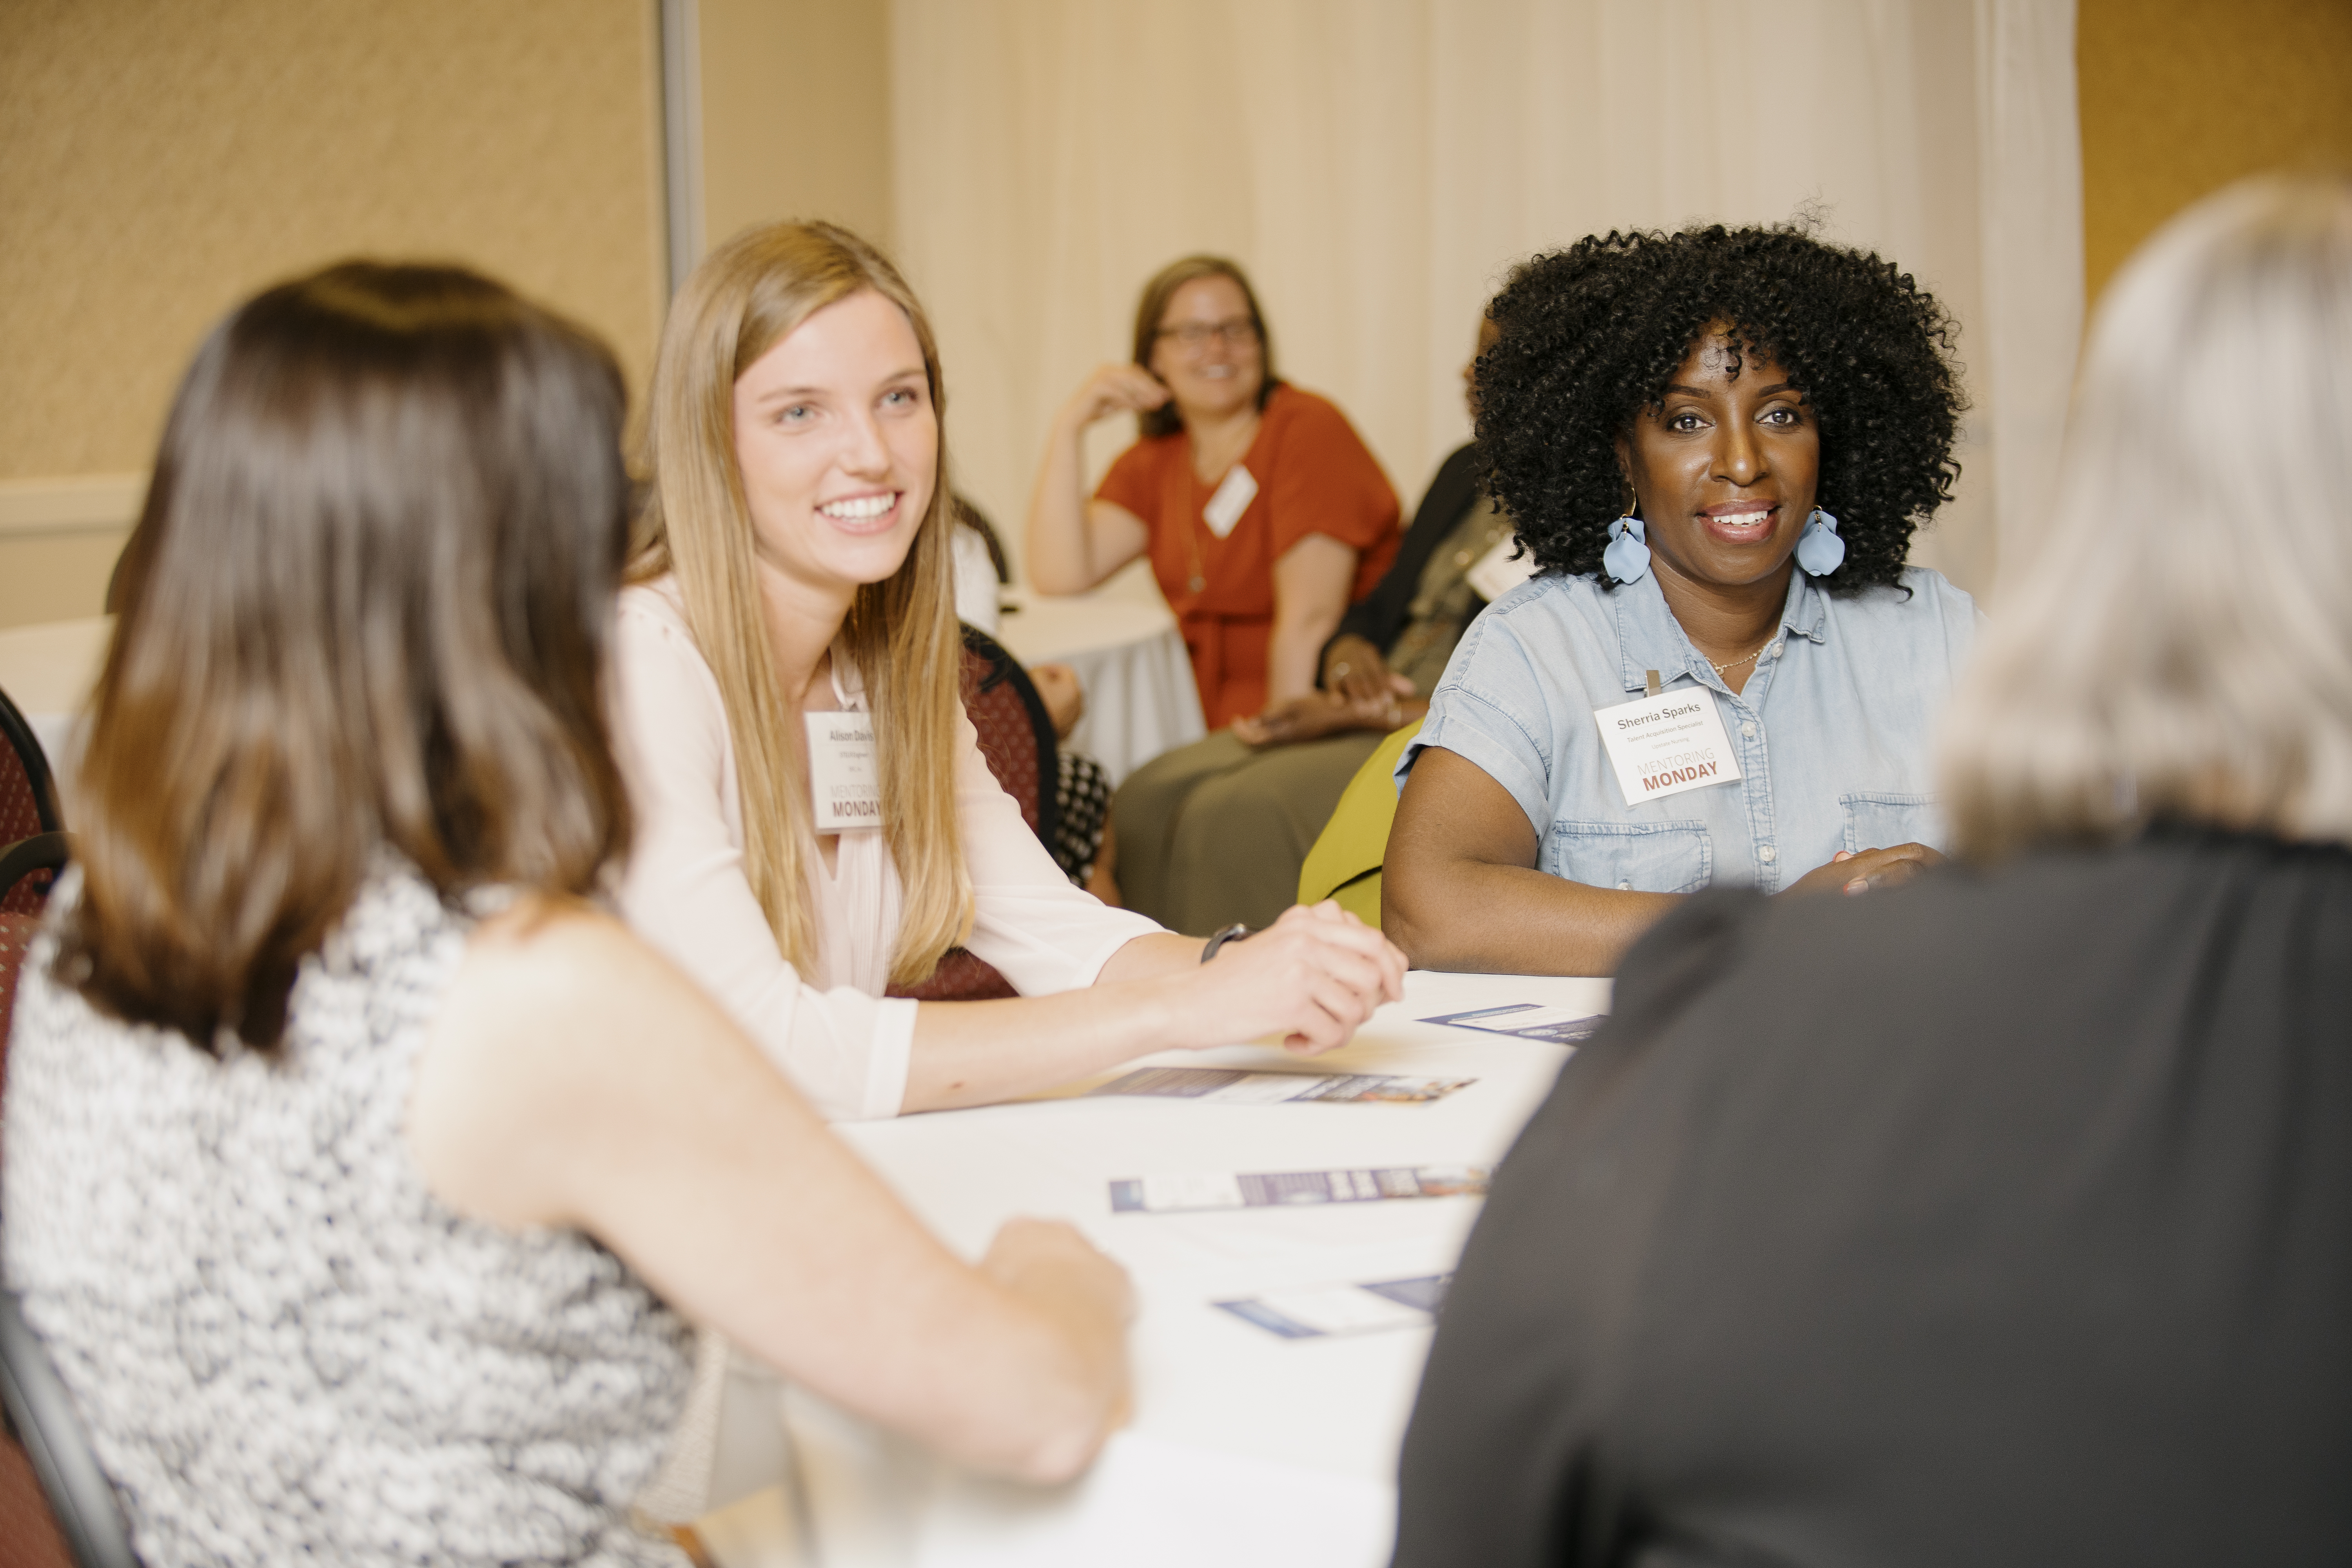 Women's networking event connects CNY mentors with rising professionals,  job seekers and those exploring new careers 